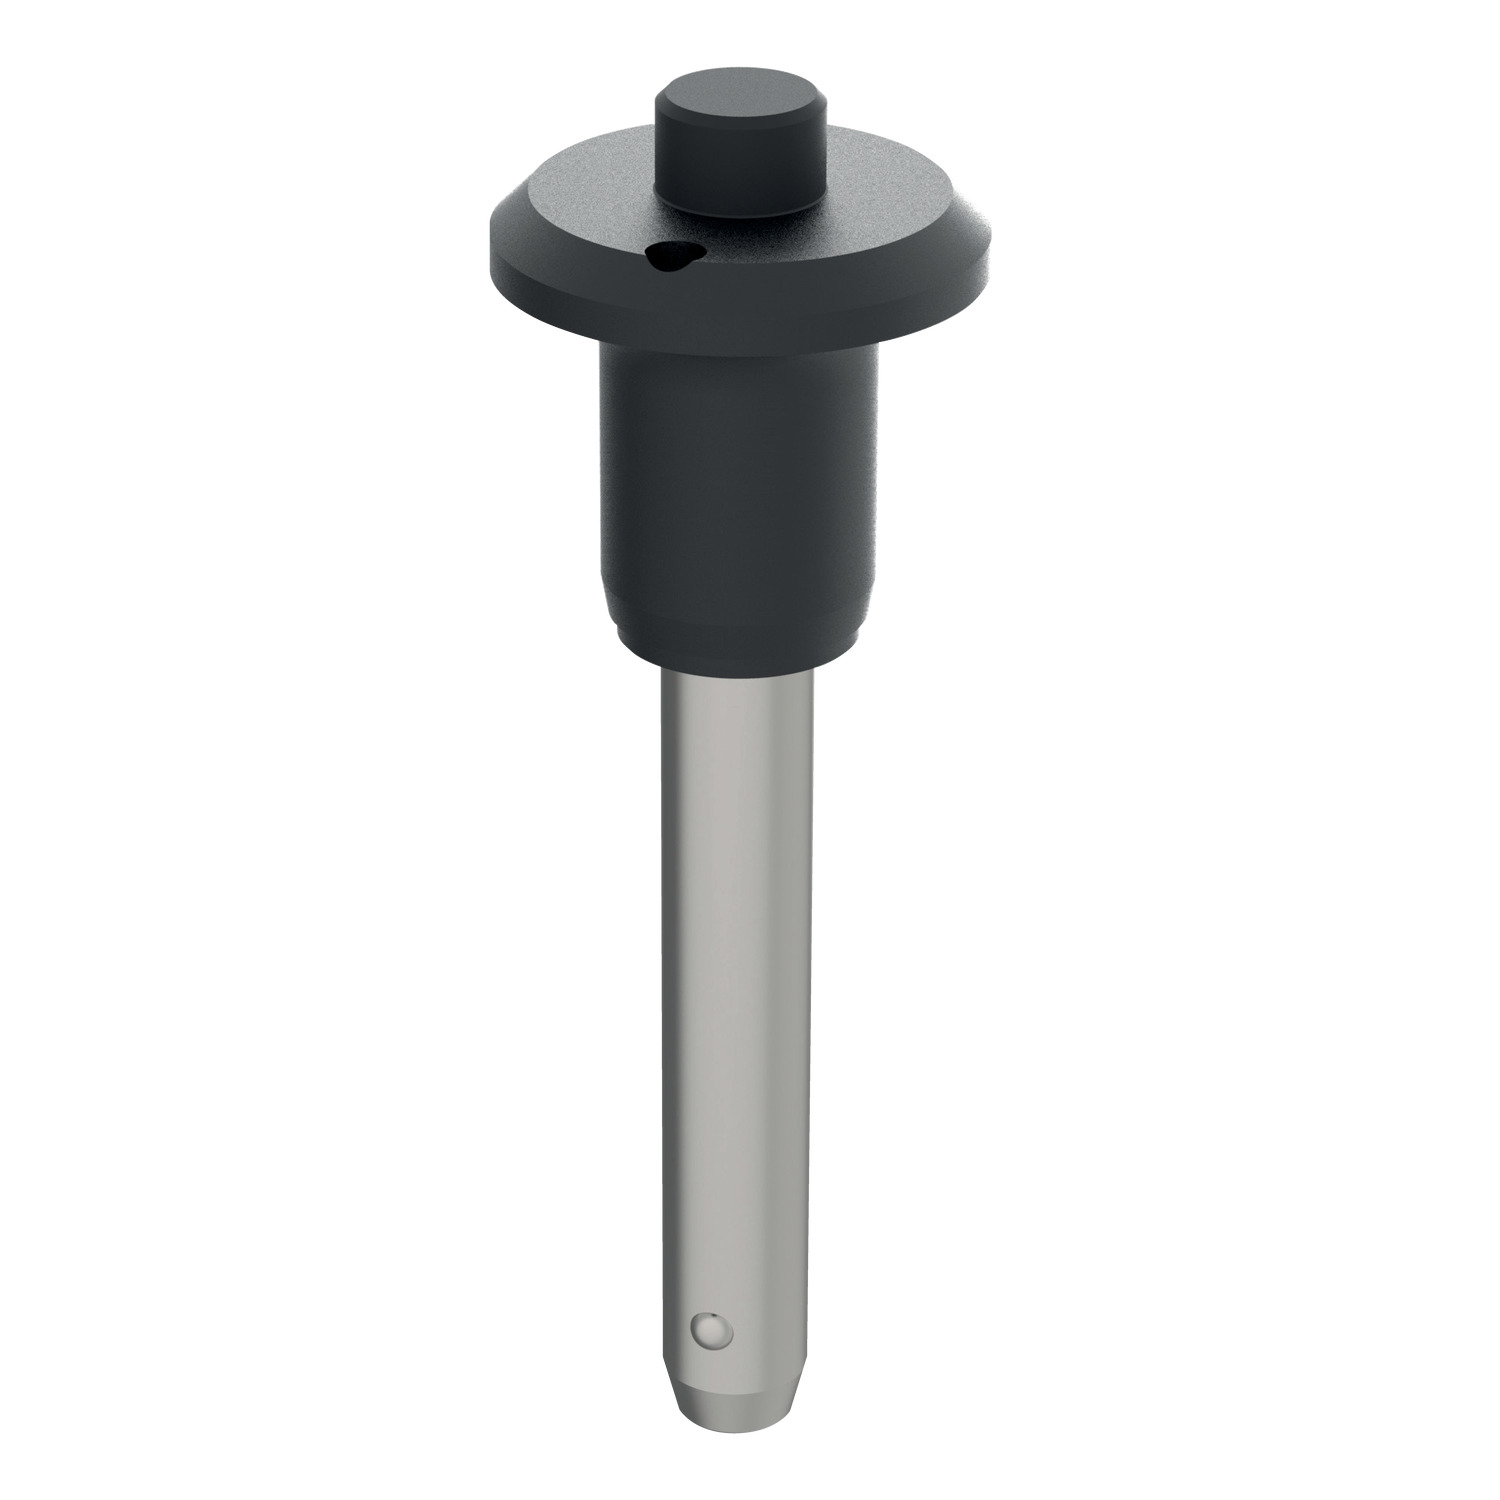 Ball Lock Pins - Mushroom Handle Mushroom handle ball lock pins designed for limited space applications. Wide selection of diameters and grip lengths. Use our lanyards to secure ball lock pin in application.